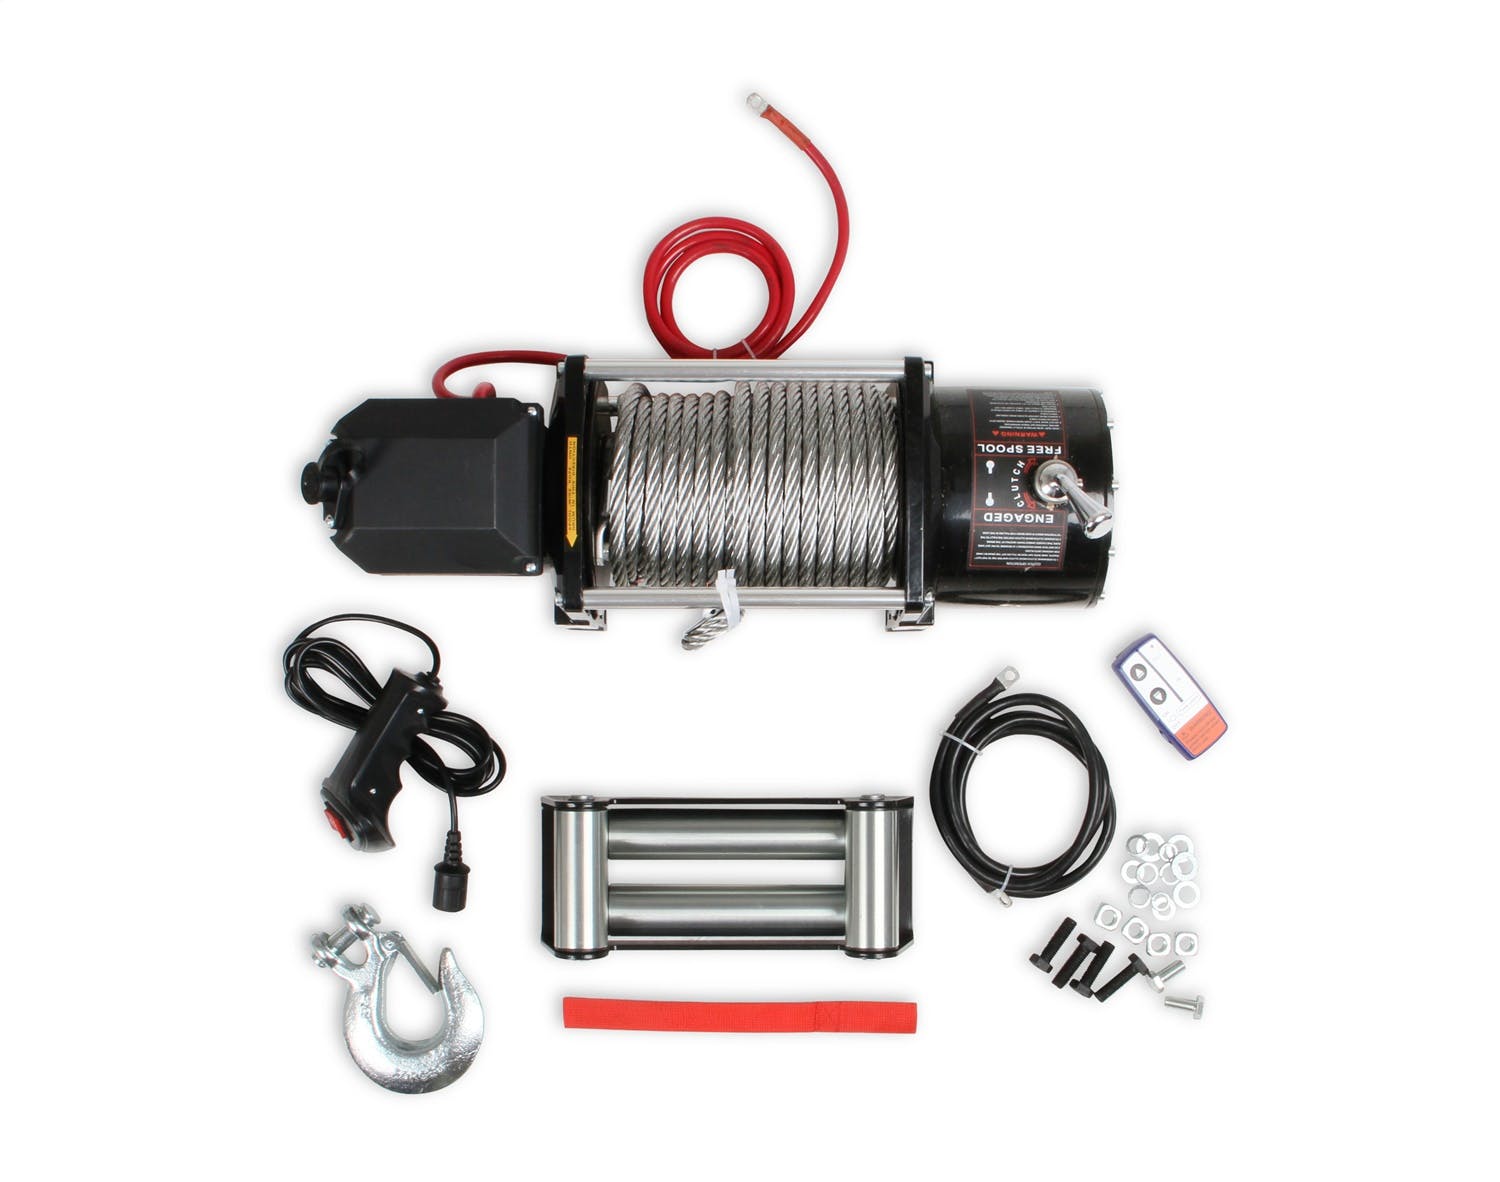 Anvil Off-Road 17001AOR 12V WINCH 17000 LBS - CABLE